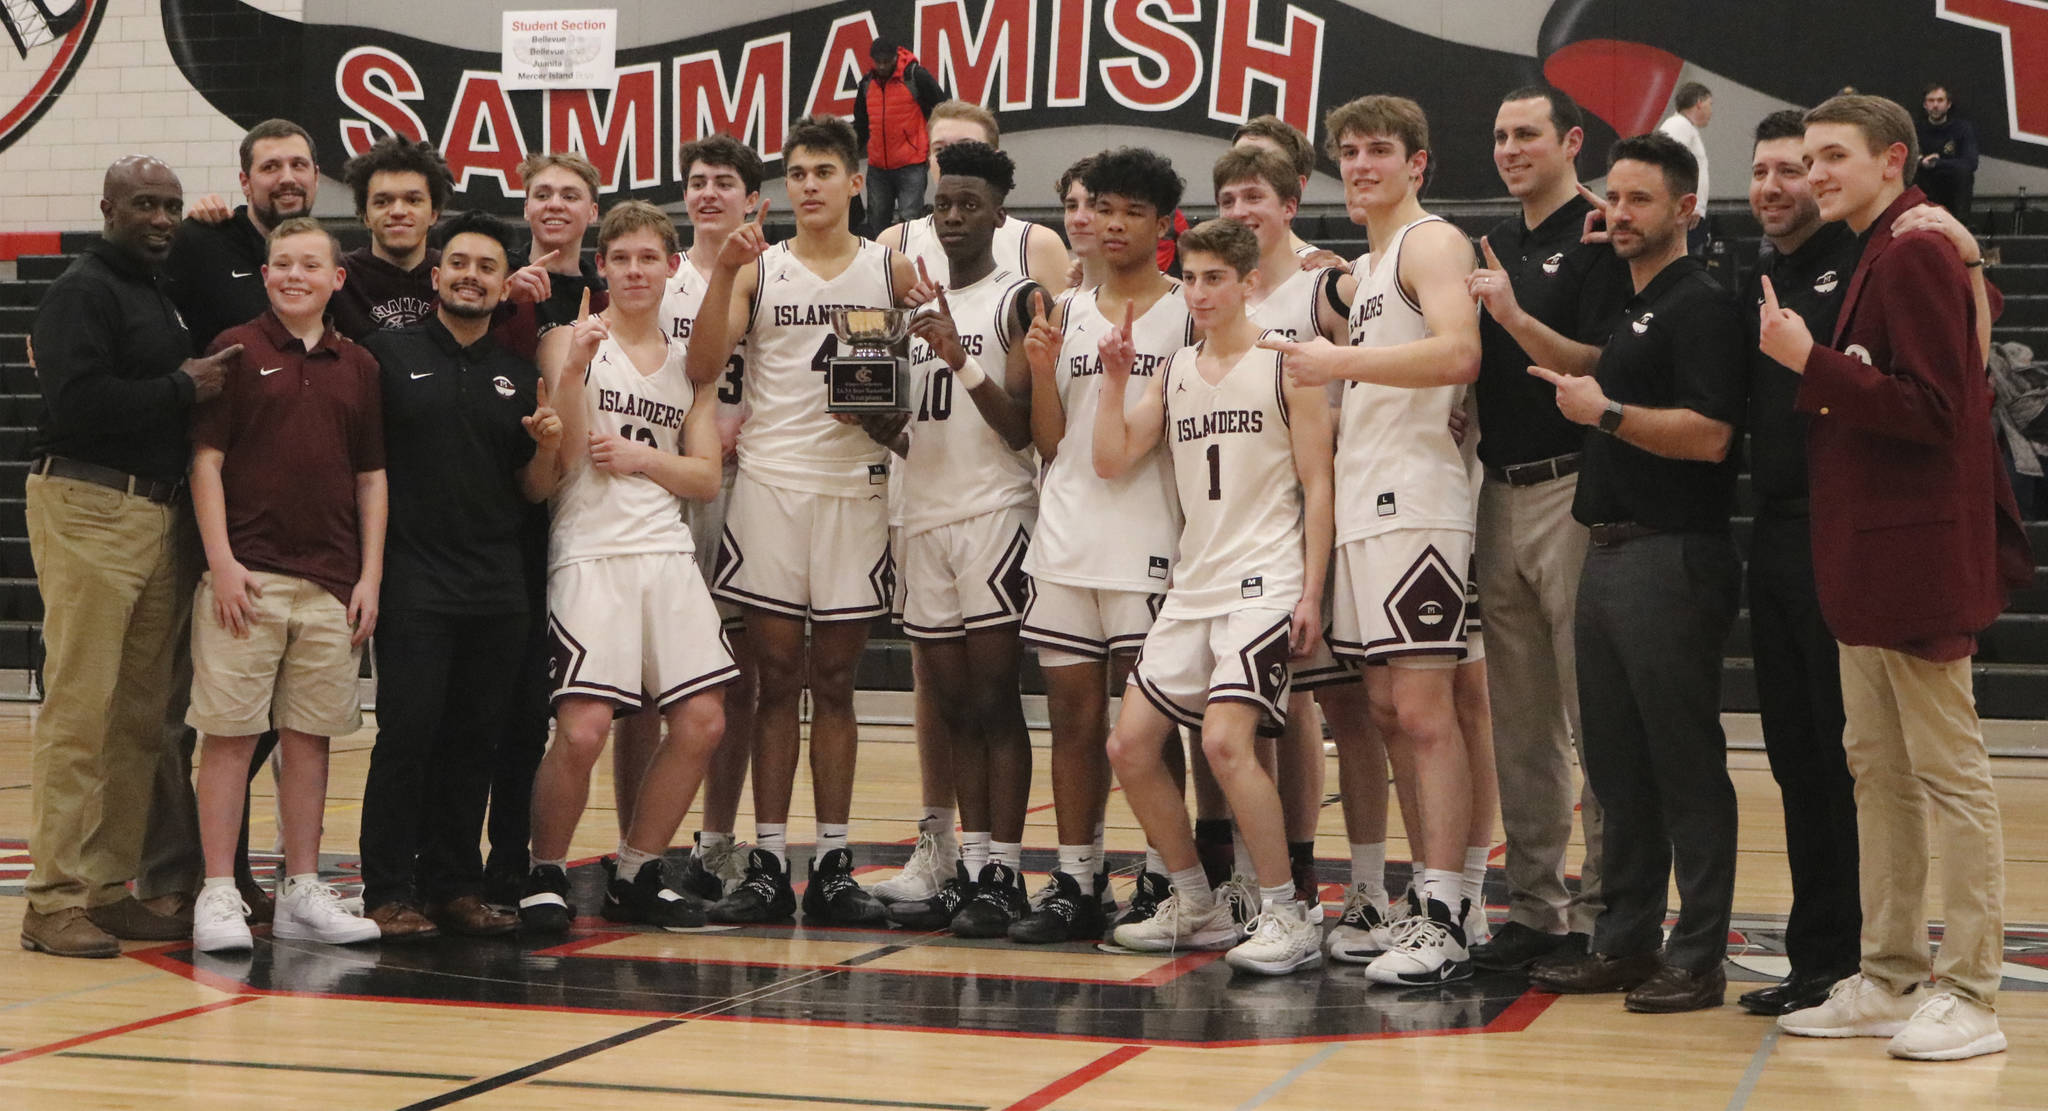 The Mercer Island boys basketball team celebrates its 61-36 victory over Interlake in the 3A KingCo championship game on Feb. 11 at Sammamish High School. Benjamin Olson/staff photo